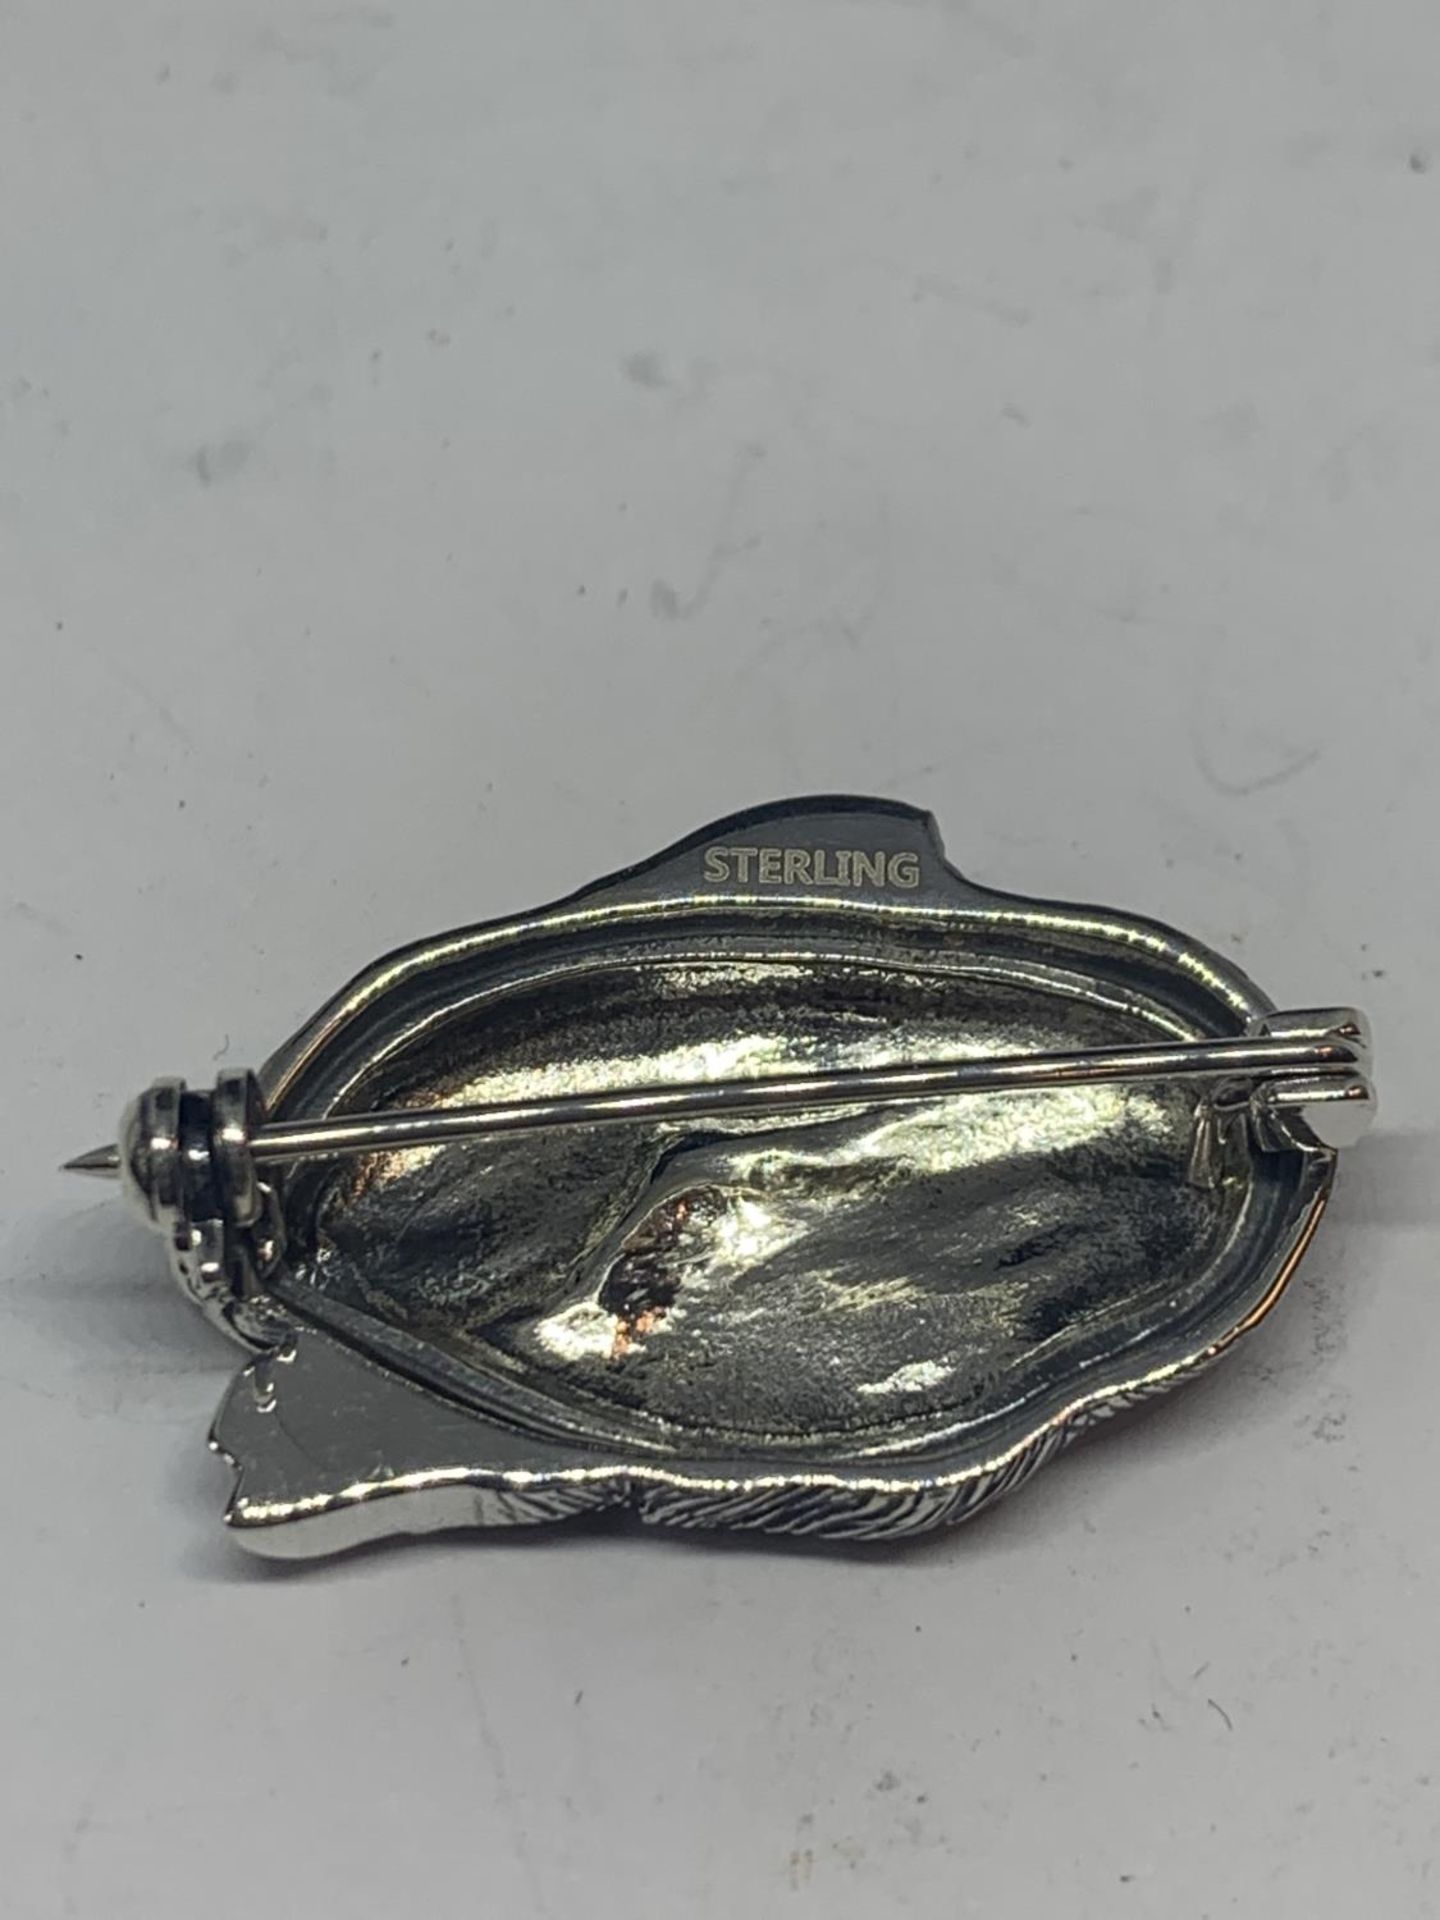 A MARKED SILVER RABBIT BROOCH - Image 4 of 4